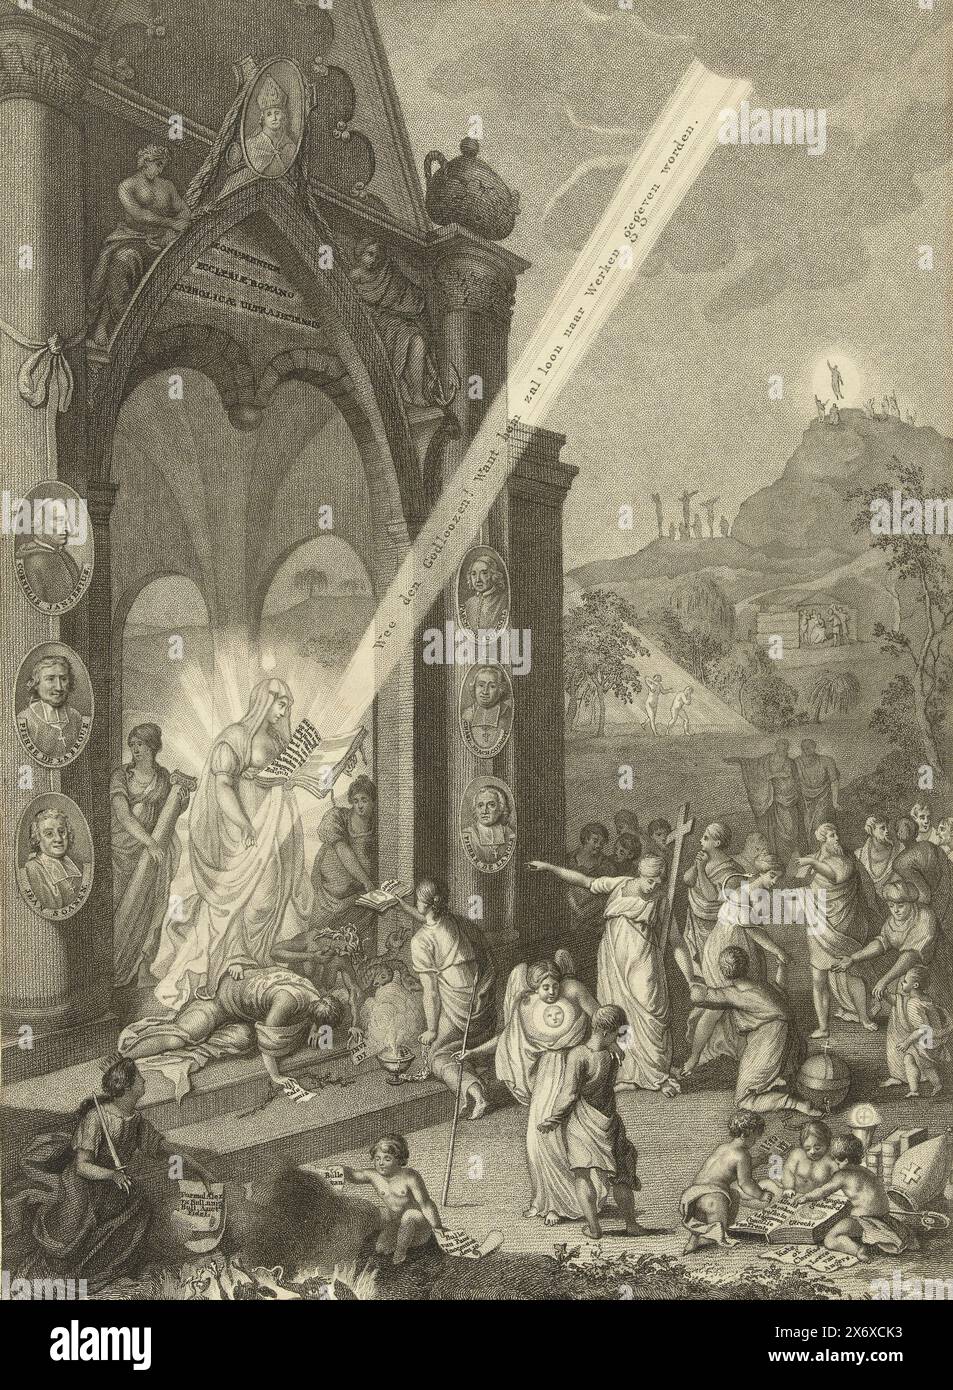 Allegory in honor of the Jansenists, 1724, Allegory in honor of the Jansenists and Quesnel. On the left the monument of the Roman Catholic Church of Utrecht, decorated with six portraits of Jansenists, in the opening is the Religion illuminated by a ray of divine light. In the foreground the tearing and burning of papal bulls., print, print maker: anonymous, Northern Netherlands, 1724, paper, etching, height, 362 mm × width, 265 mm Stock Photo